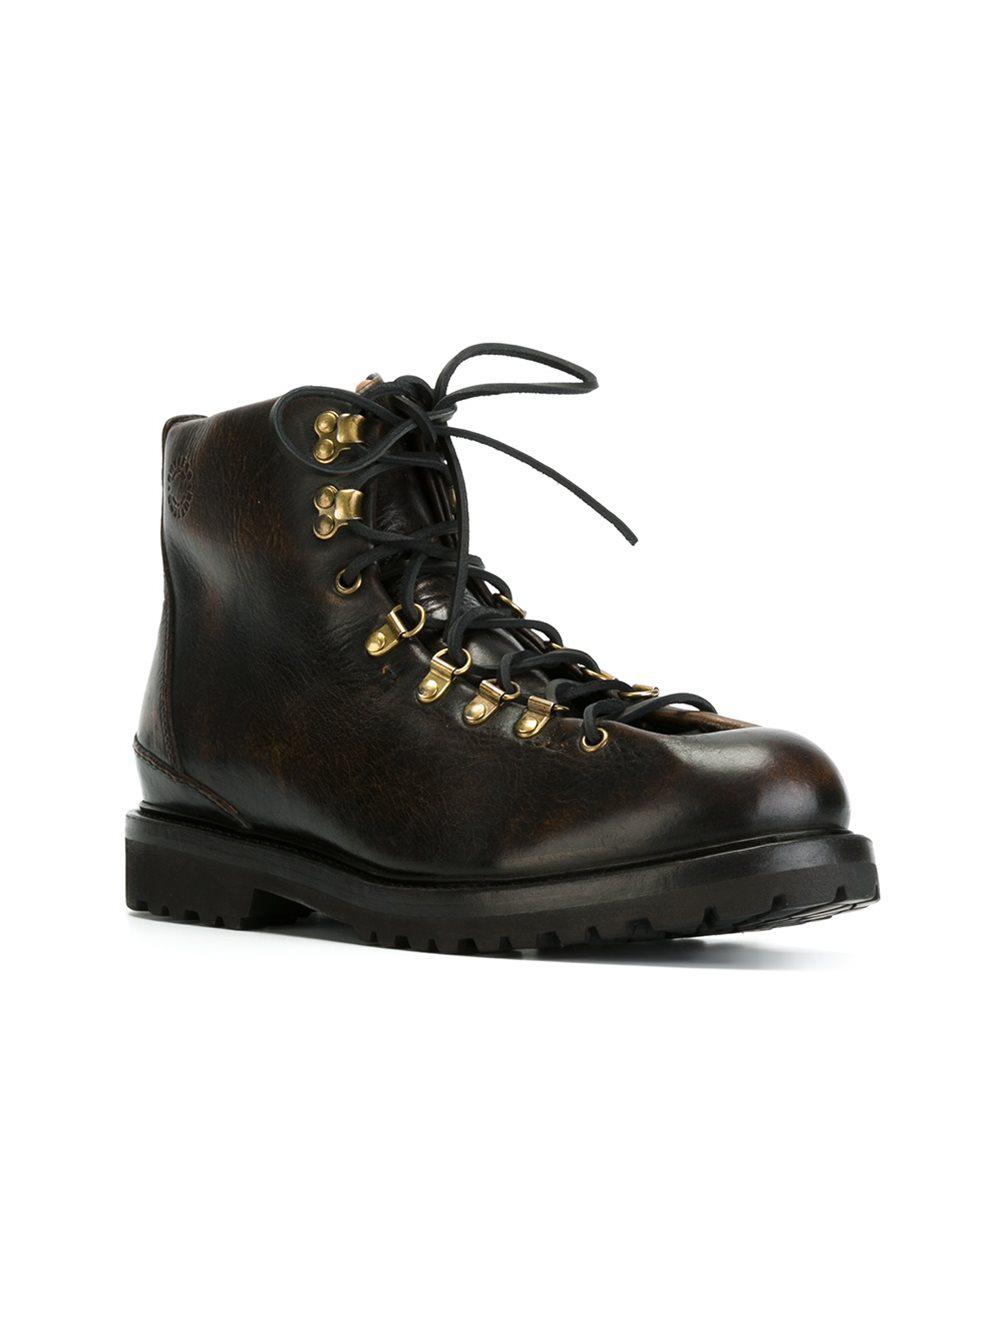 Buttero Classic Hiking Boots in Black for Men - Lyst